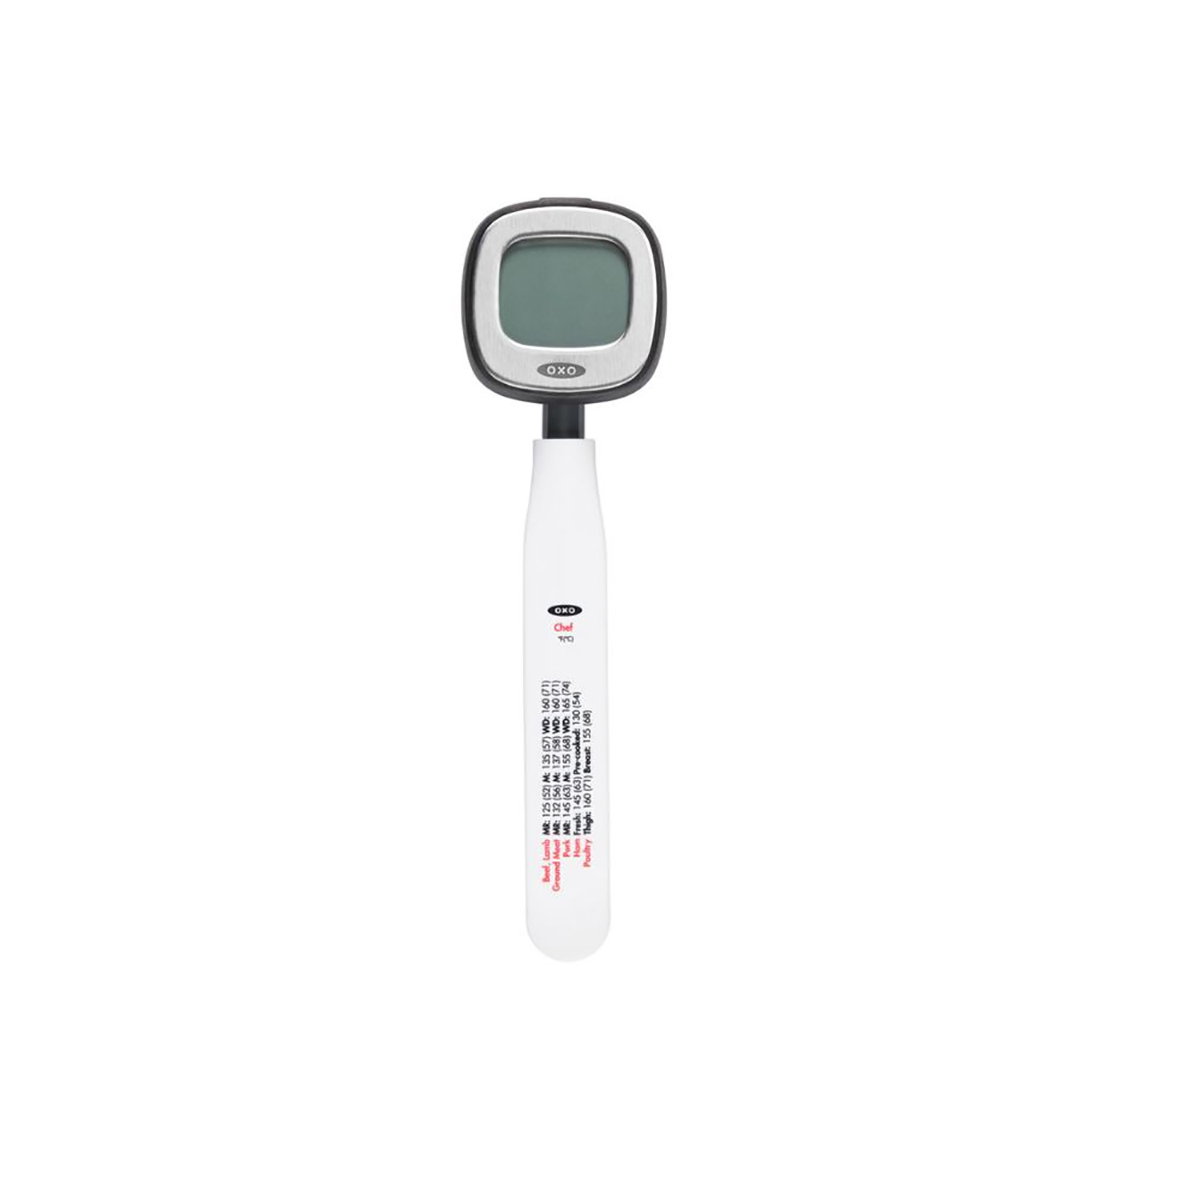 OXO Good Grips(R) Chef's Precision Digital Thermometer